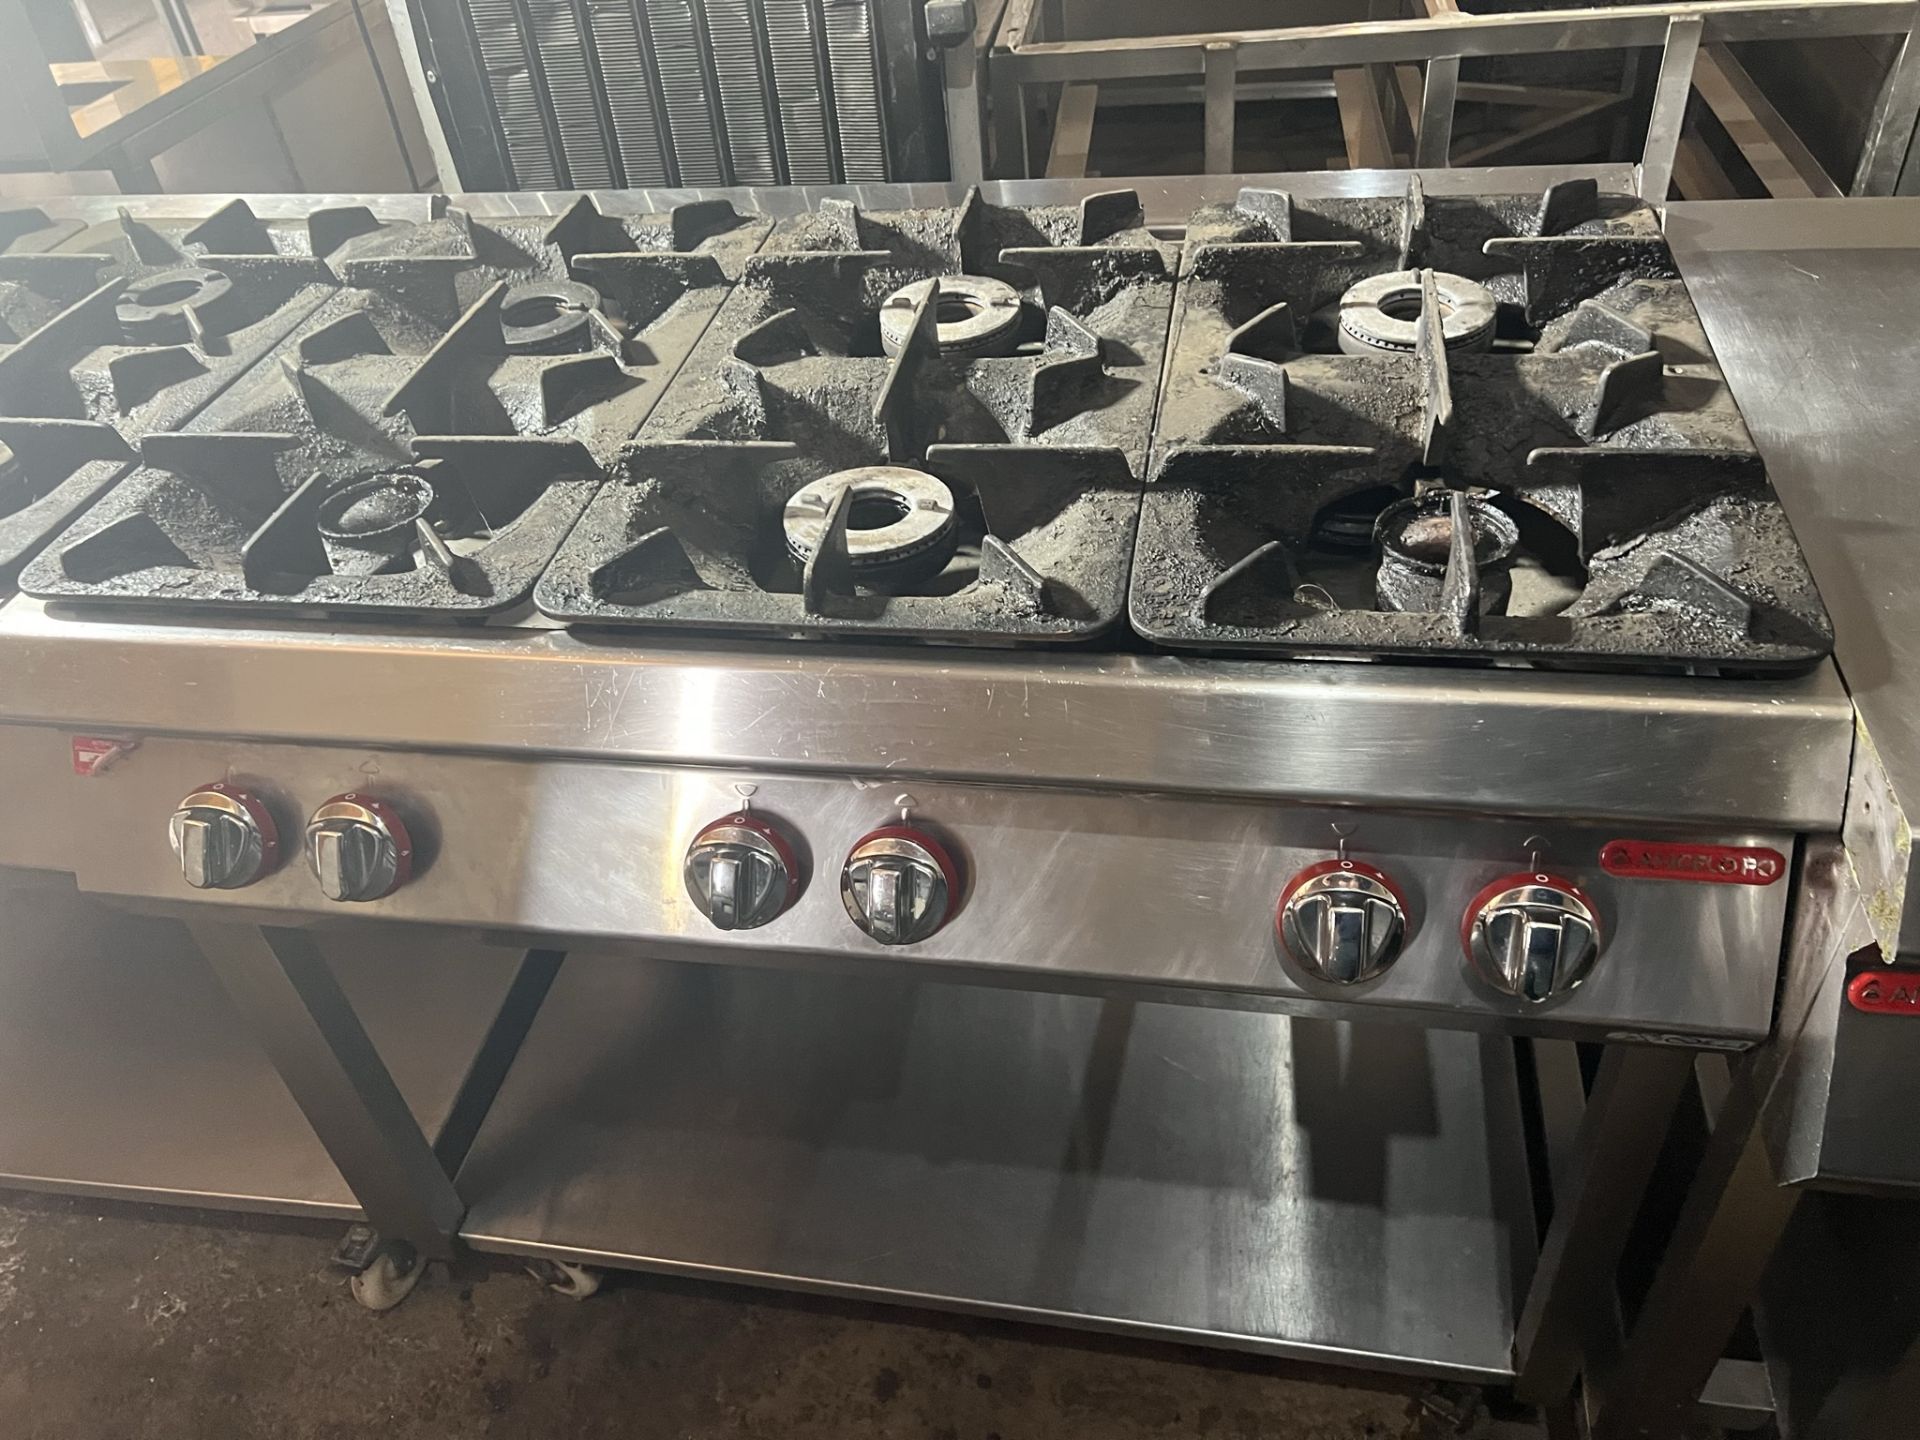 Angelo Po 6 Burner Boiling Top on Stand Natural Gas